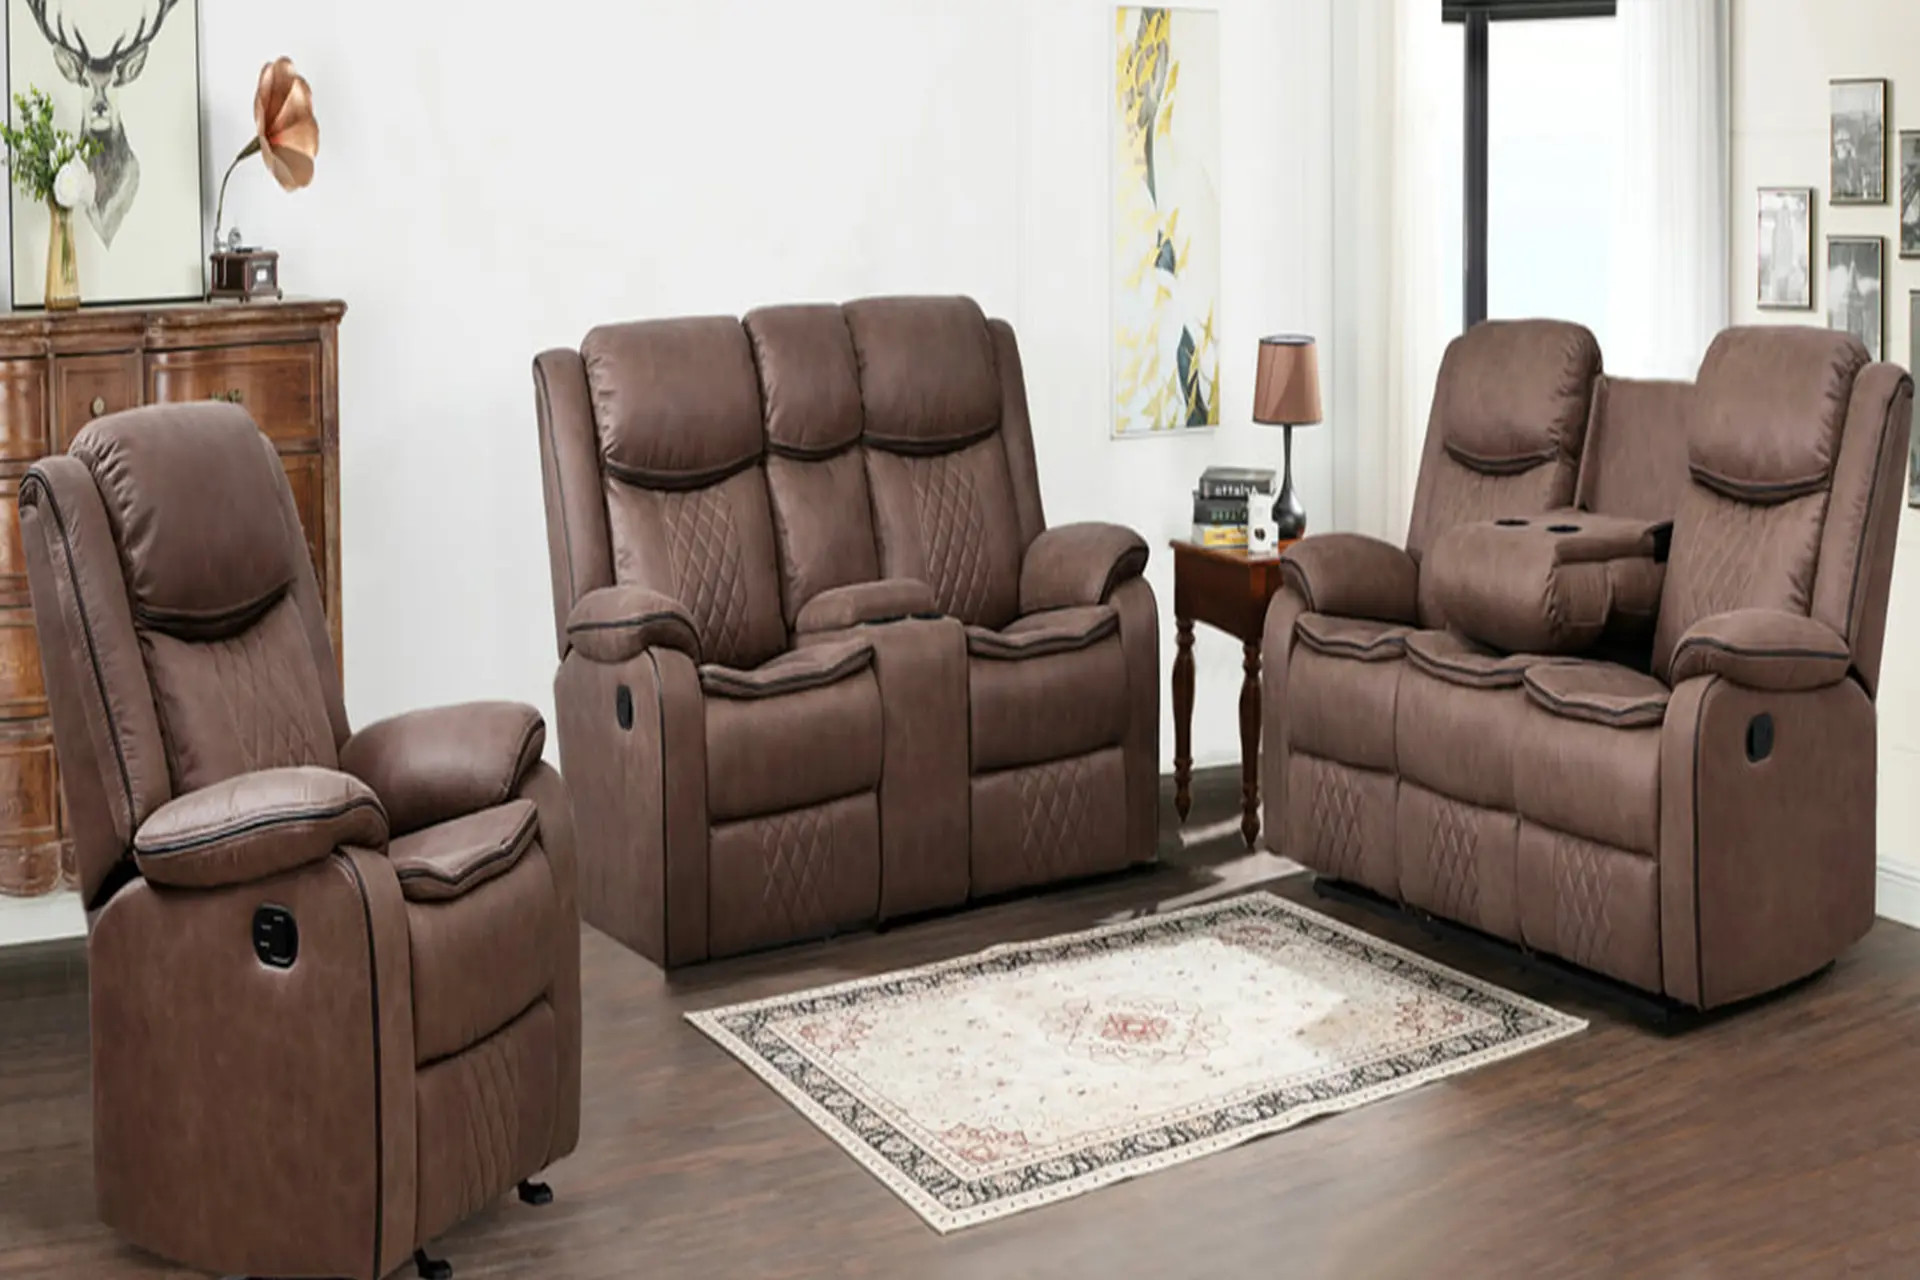 Weston Brown Reclining Sofa, Love, and Recliner.